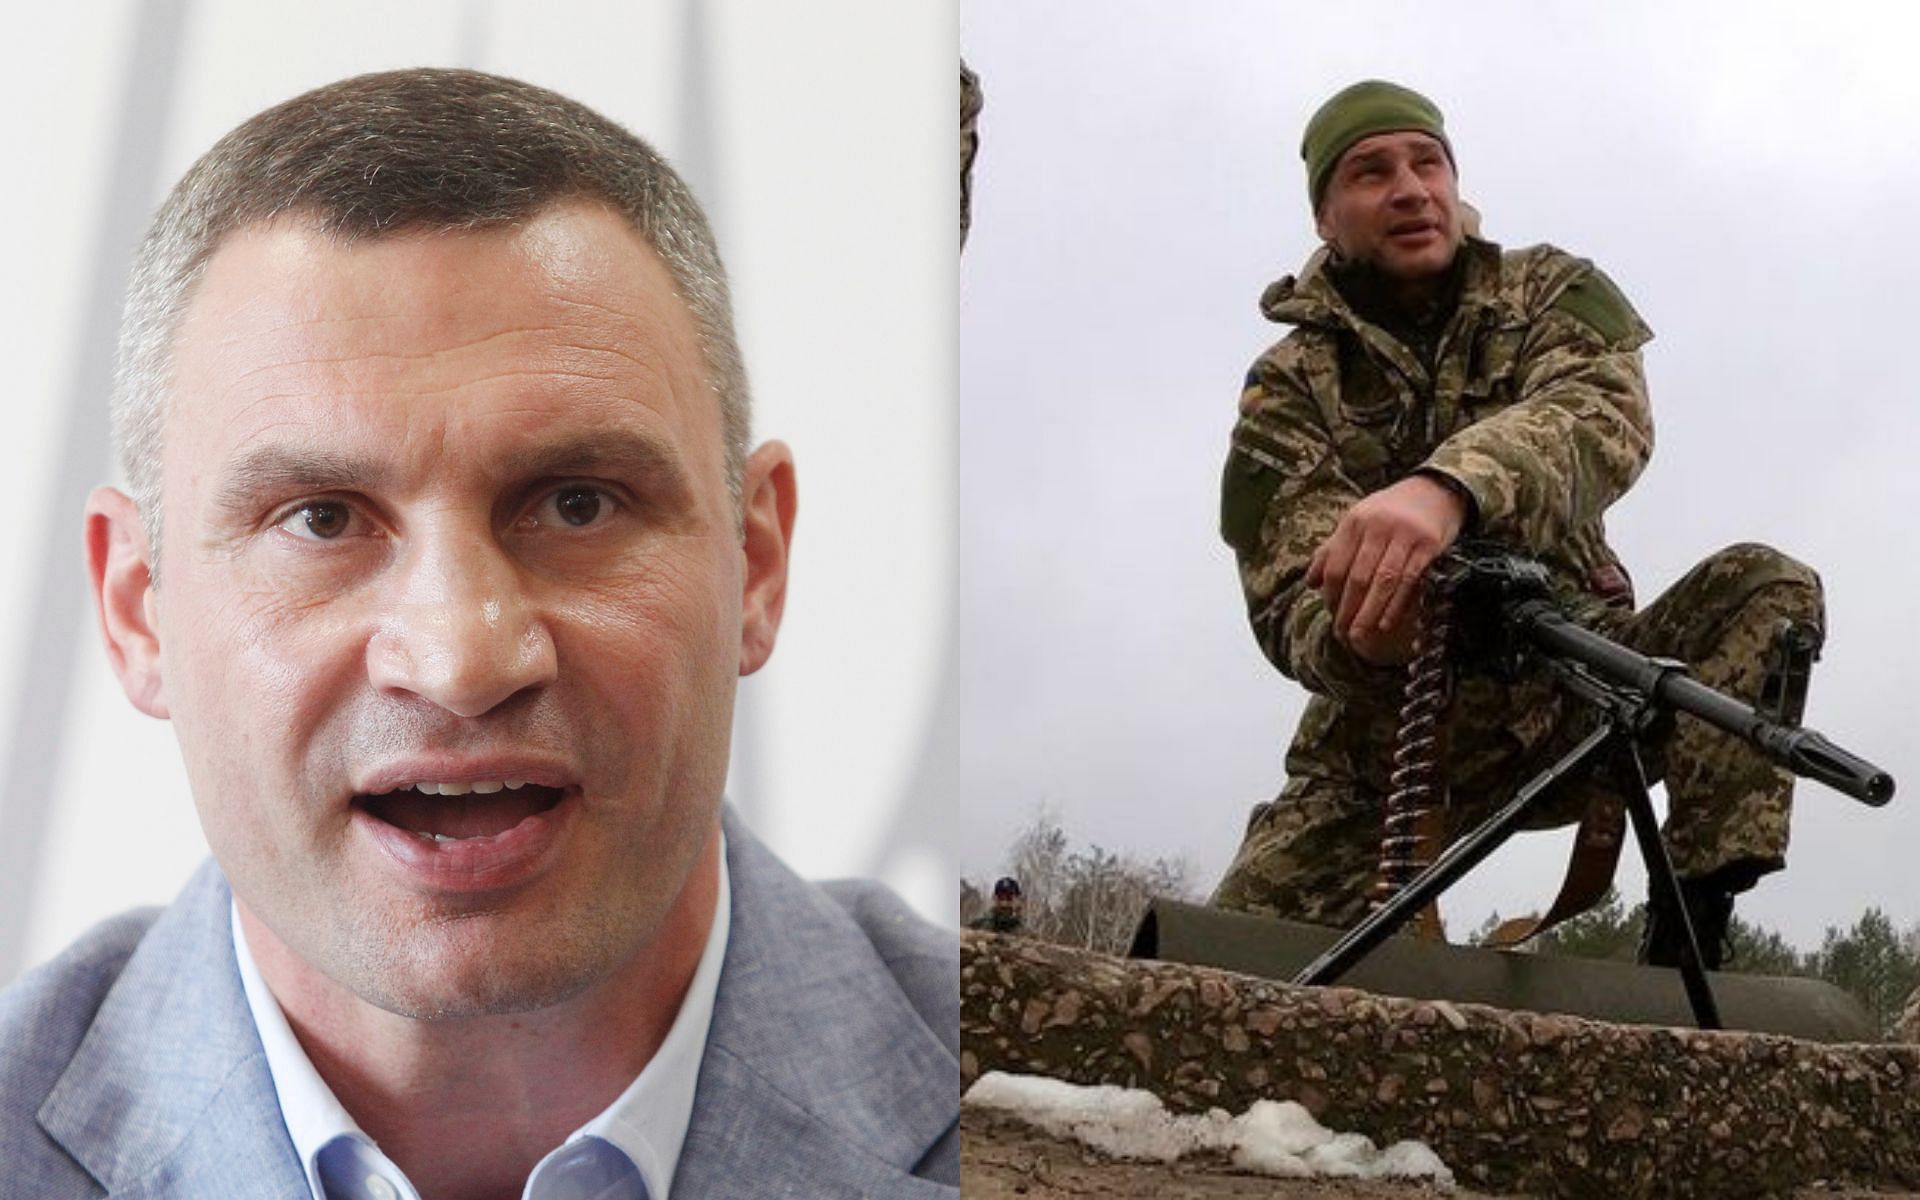 Vitali Klitschko at a press conference (left) and in his army fatigues (right)